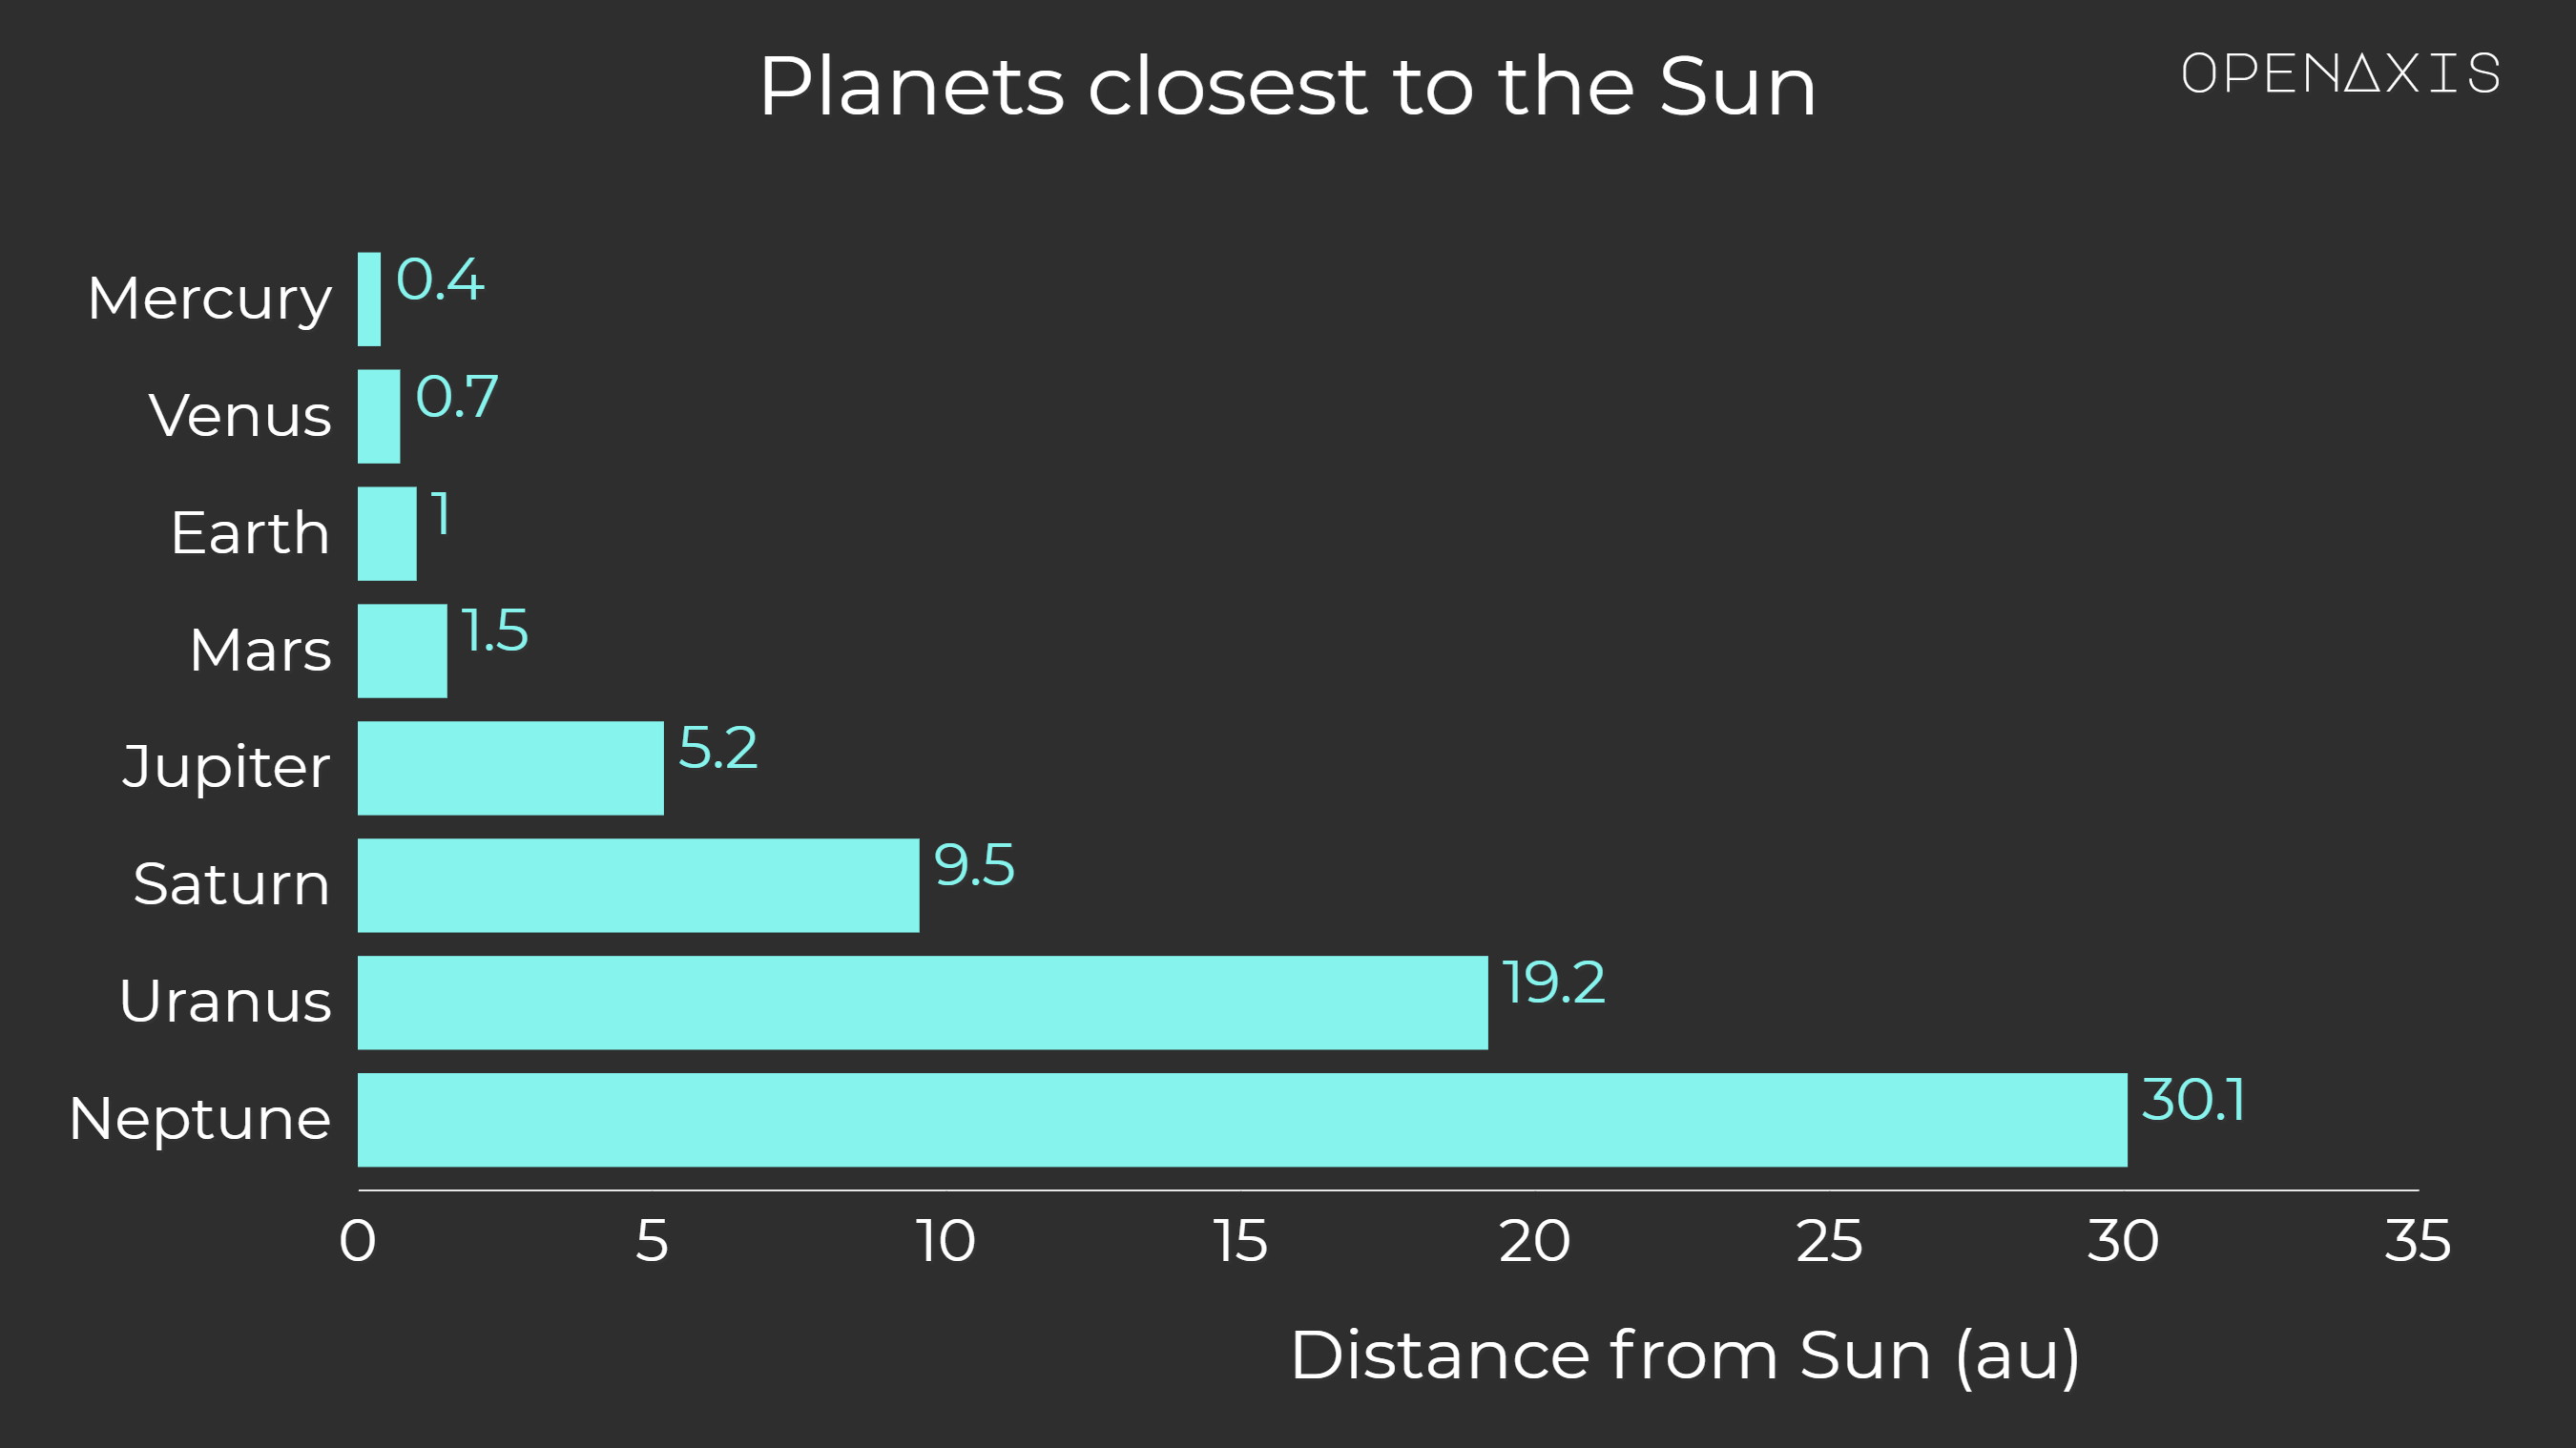 <p>Distance from the Sun to planets in astronomical units (au).</p><p><br /></p><p><span data-index="0" data-denotation-char data-id="0" data-value="&lt;a href=&quot;/search?q=%23planets&quot; target=_self&gt;#planets" data-link="/search?q=%23planets">﻿<span contenteditable="false"><span></span><a href="/search?q=%23planets" target="_self">#planets</a></span>﻿</span> <span data-index="0" data-denotation-char data-id="0" data-value="&lt;a href=&quot;/search?q=%23solarsystem&quot; target=_self&gt;#solarsystem" data-link="/search?q=%23solarsystem">﻿<span contenteditable="false"><span></span><a href="/search?q=%23solarsystem" target="_self">#solarsystem</a></span>﻿</span> </p><p><br /></p><p>Source: <a href="/data/3842" target="_blank">NASA JPL</a></p><p><br /></p>